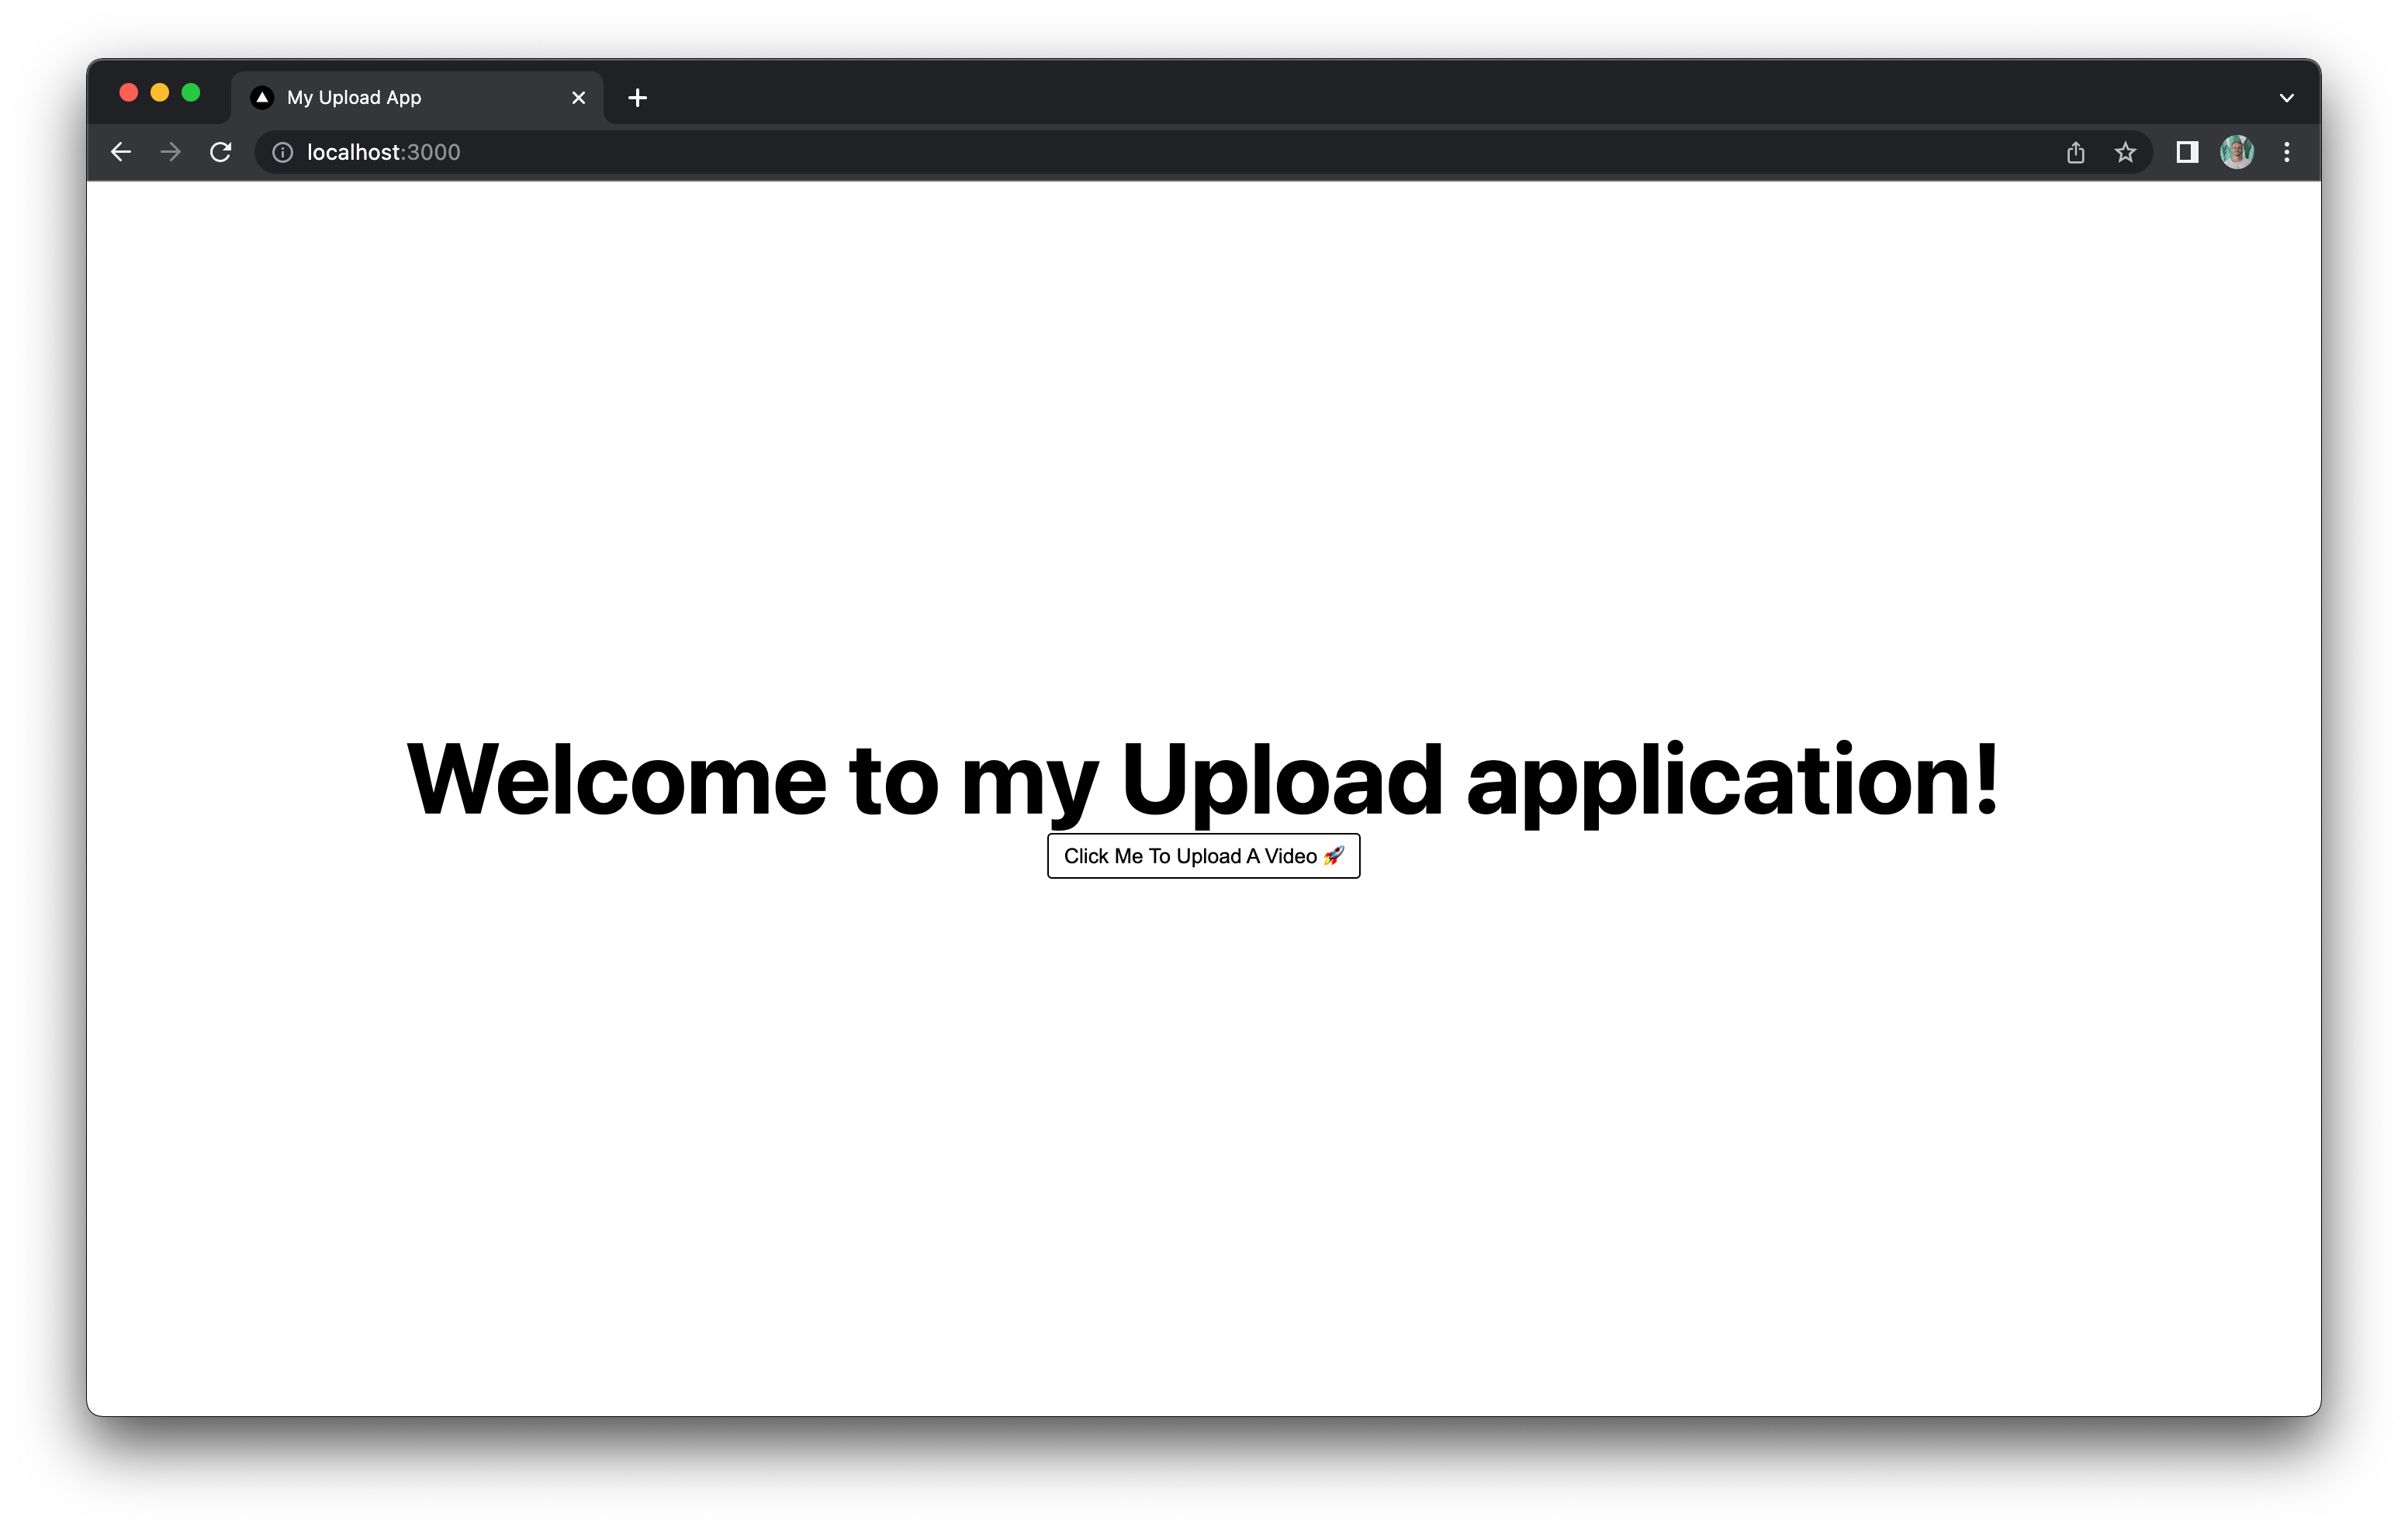 The upload application